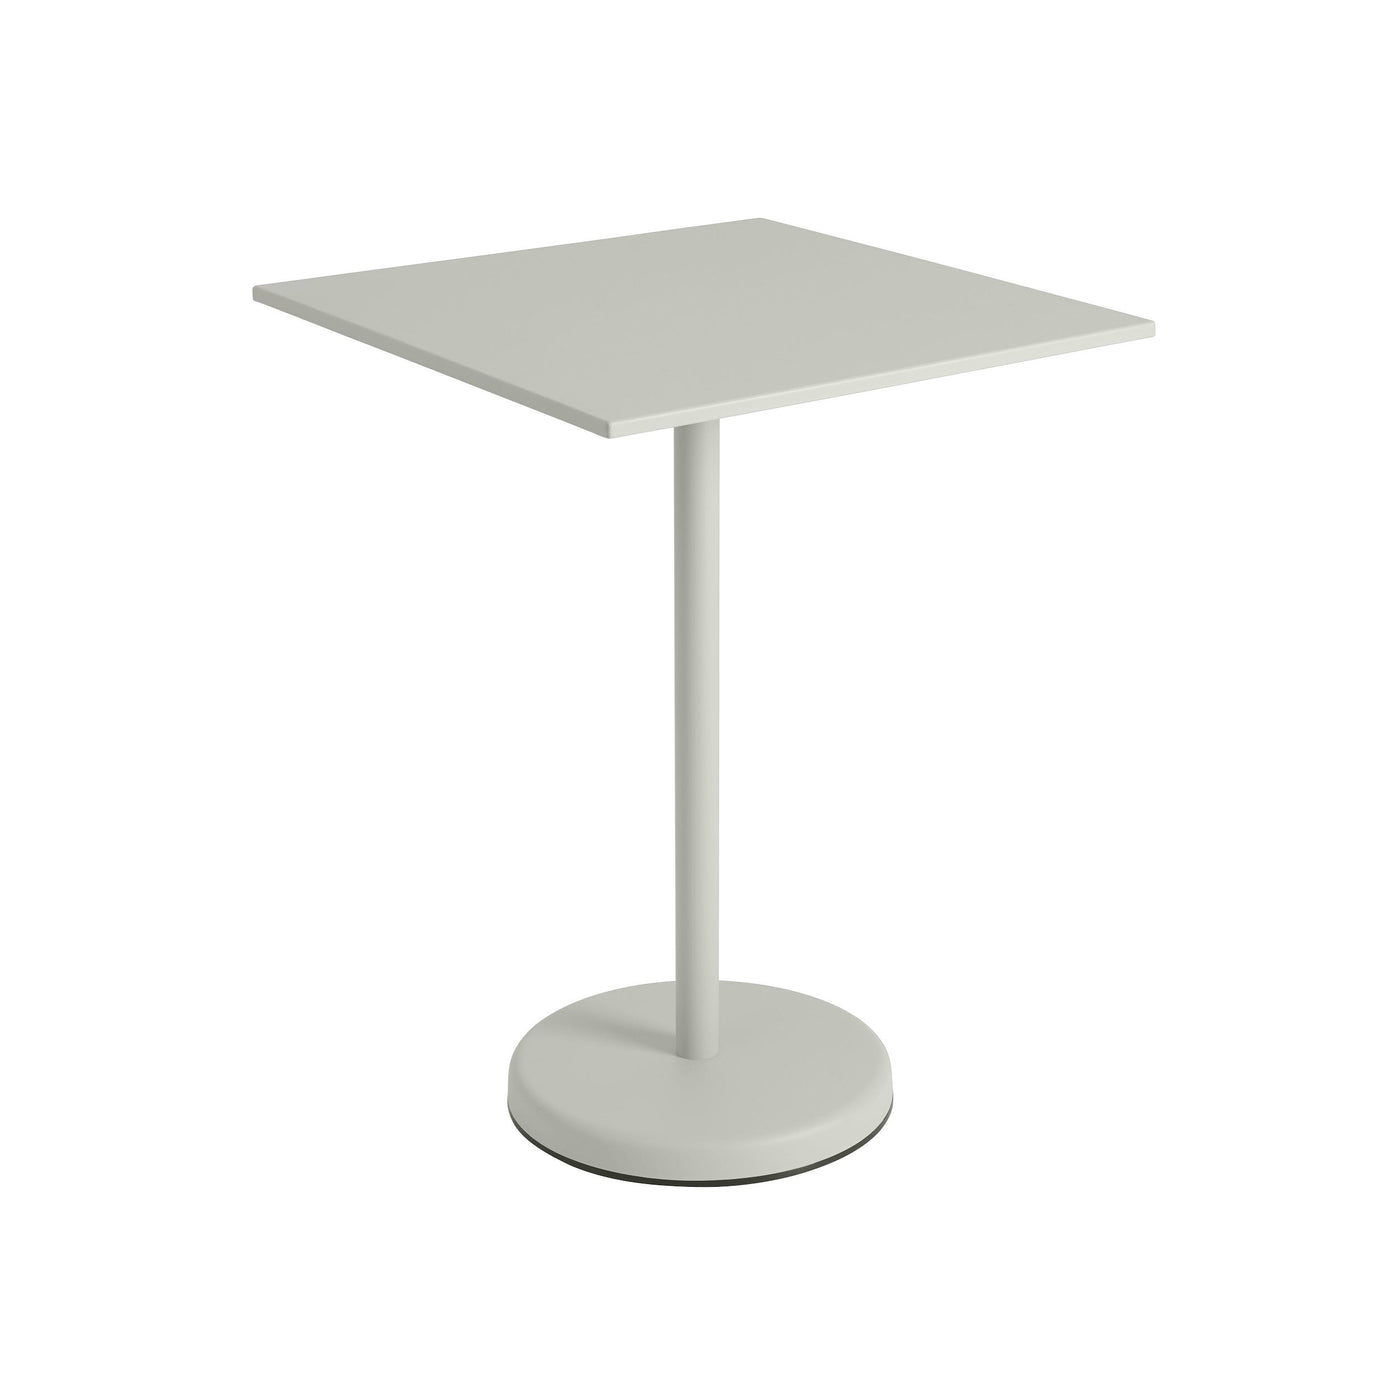 Muuto Linear Steel Cafe Table Square. Shop outdoor furniture at someday designs. #colour_grey